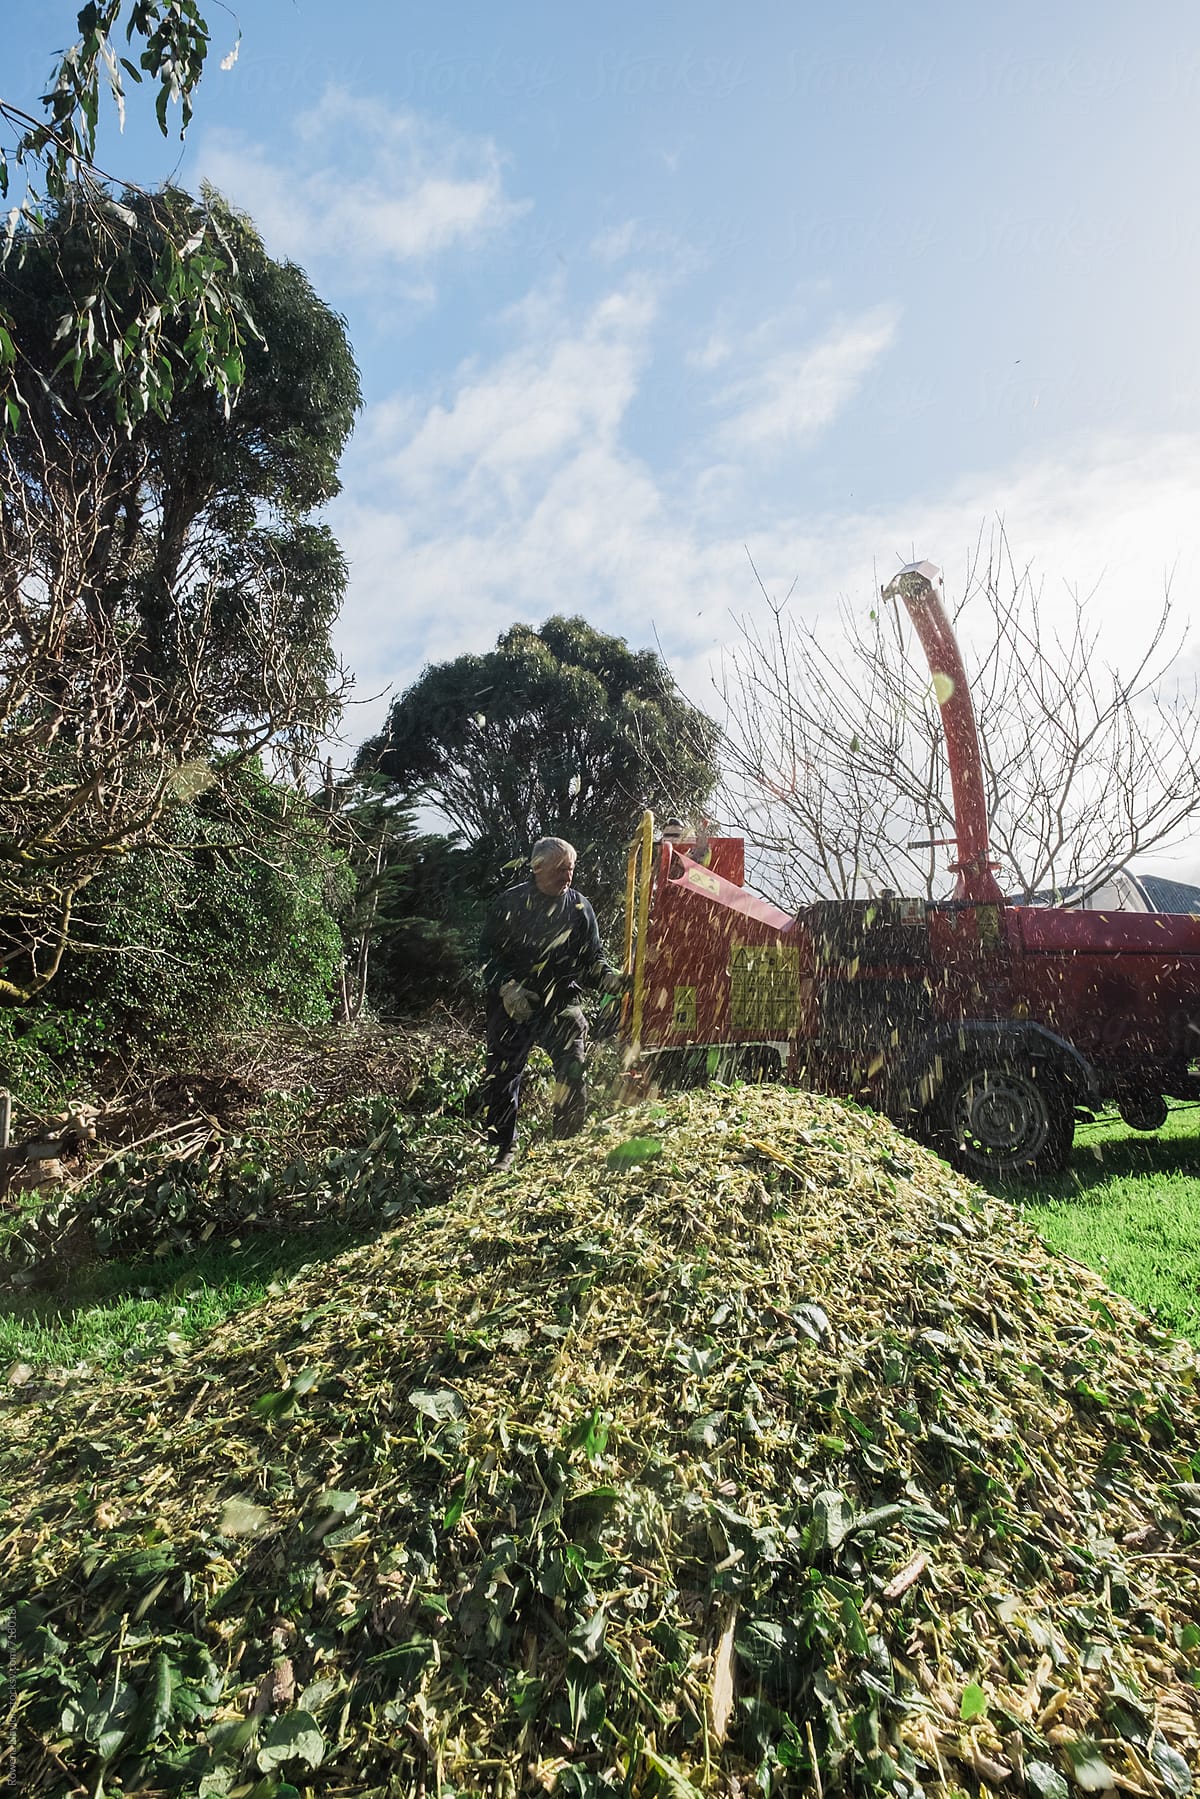 Man operating a mulching machine and creating large pile of chopped leaves and branches